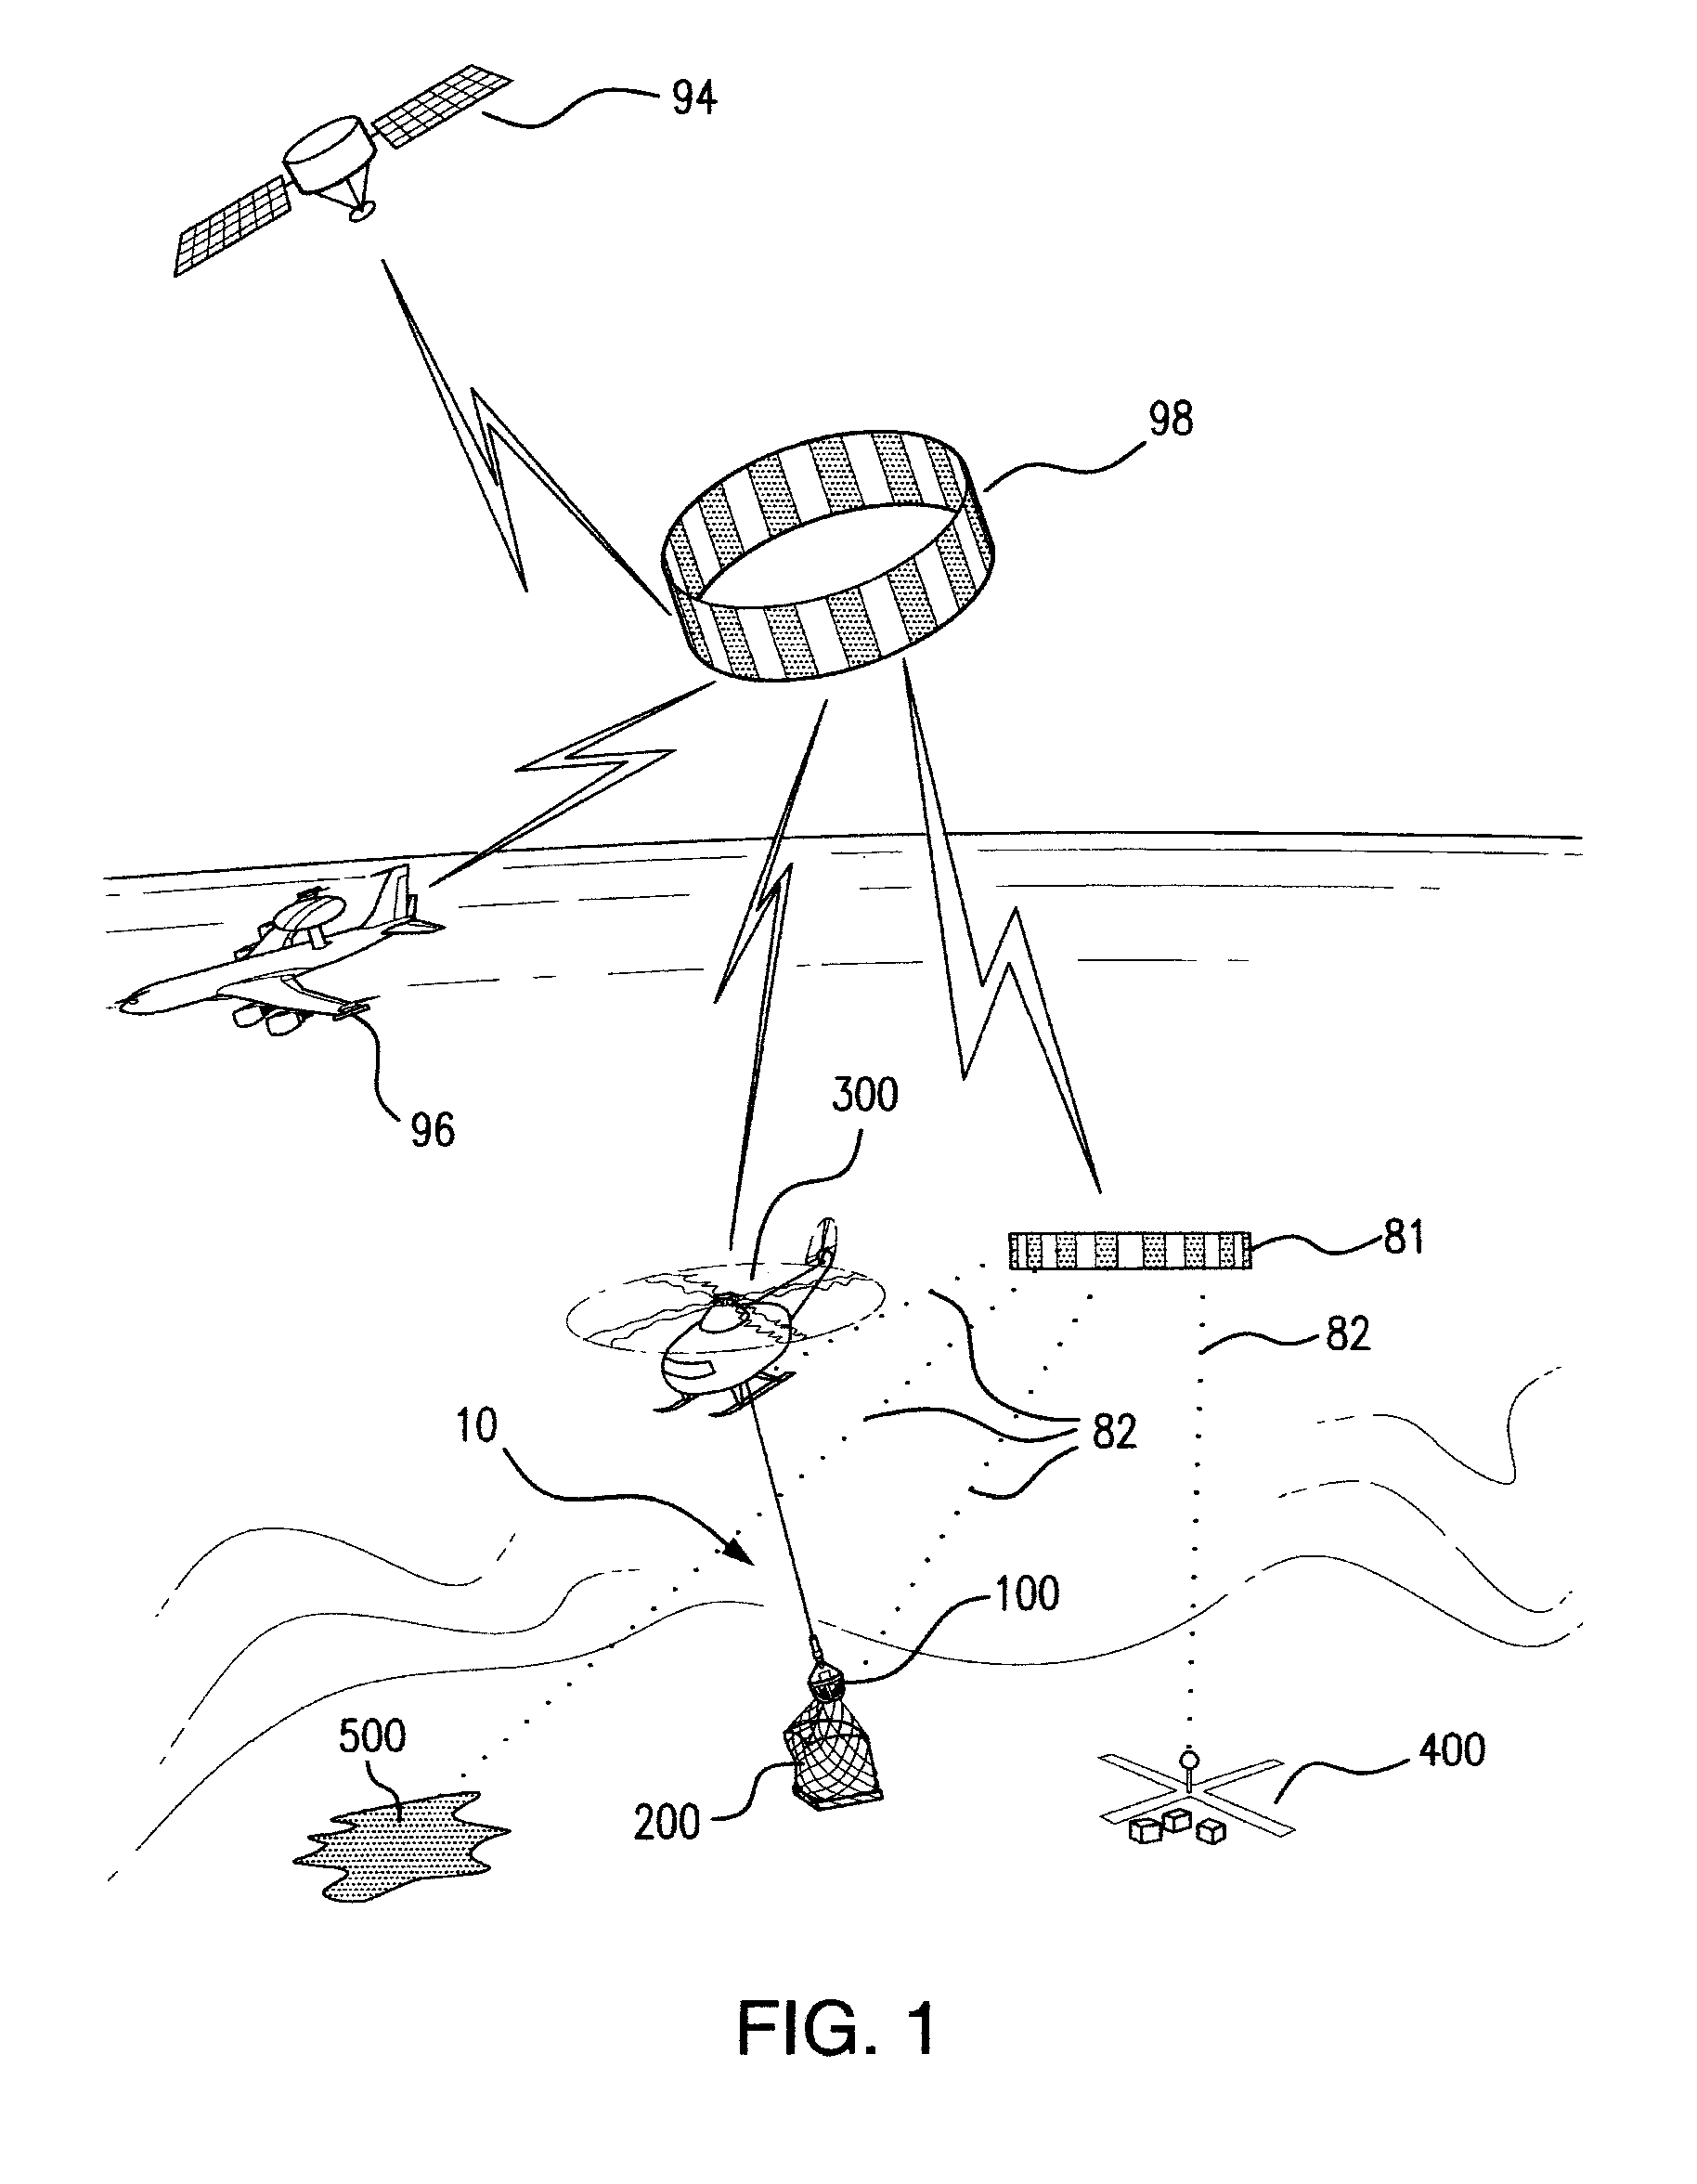 Helicopter Sling-Load Stability Control and Release System